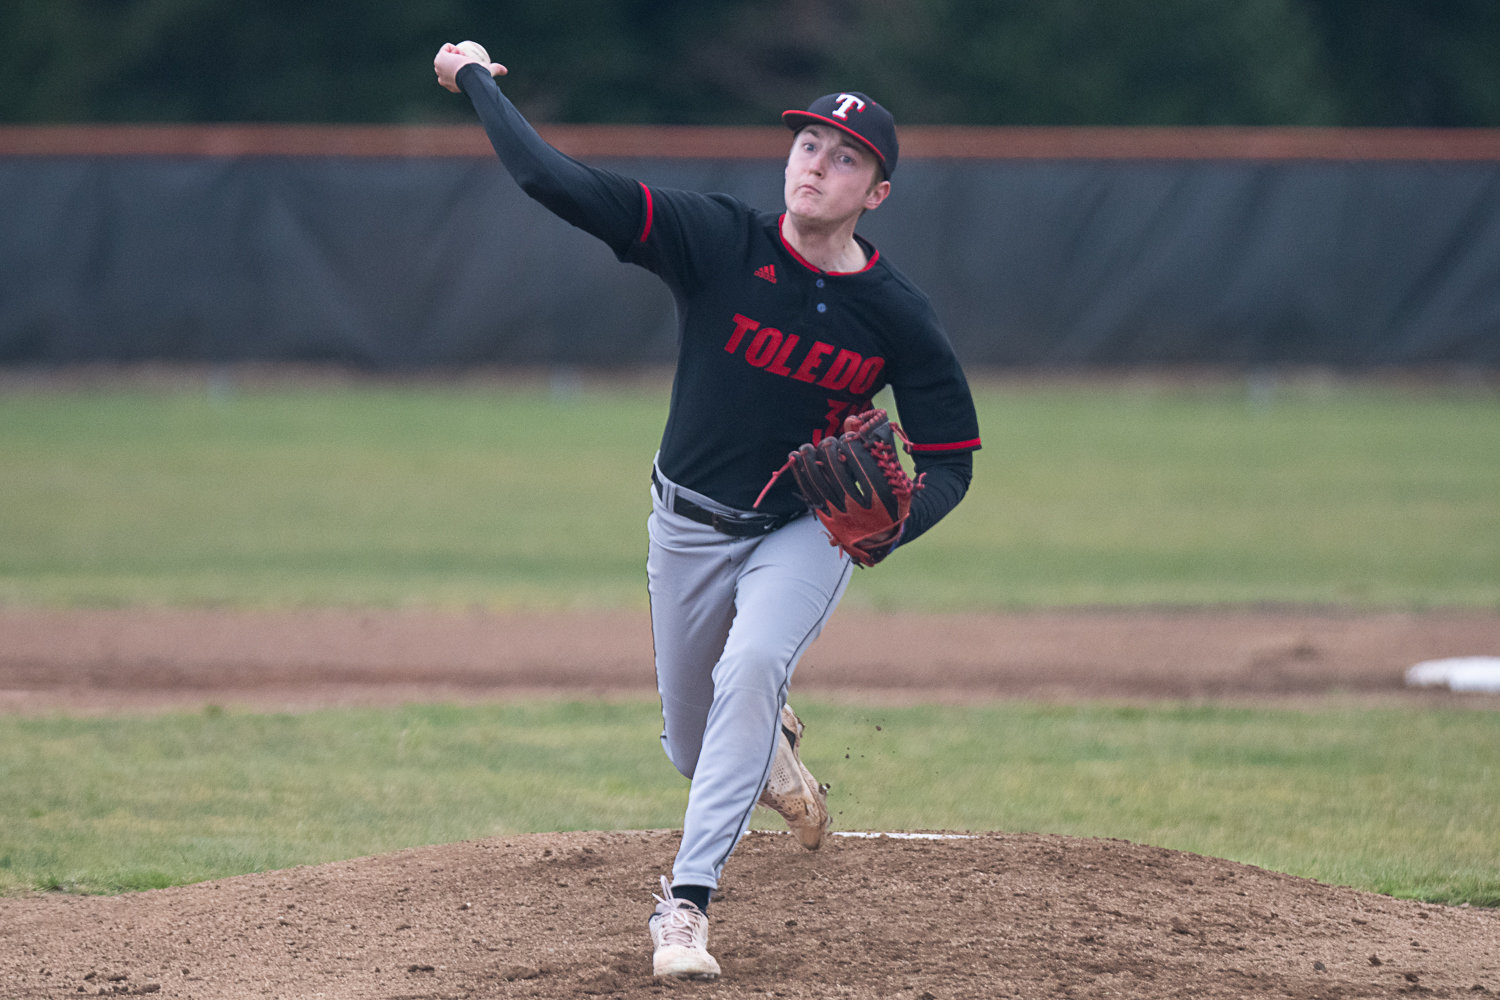 Caiden Schultz throws a pitch during Toledo's March 20 game at Napavine.